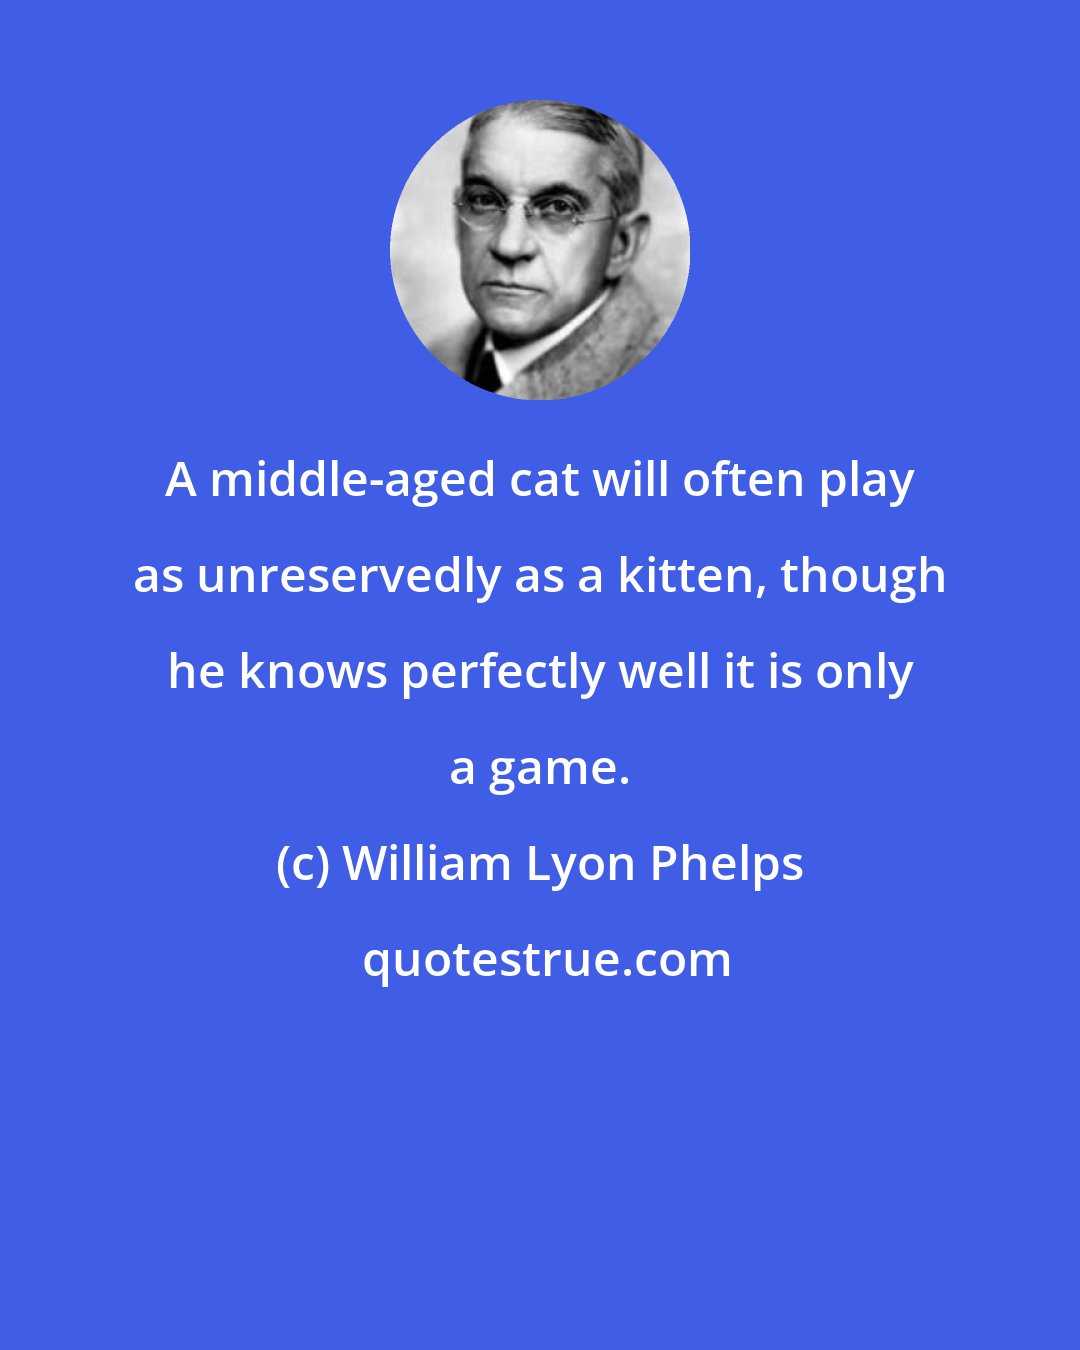 William Lyon Phelps: A middle-aged cat will often play as unreservedly as a kitten, though he knows perfectly well it is only a game.